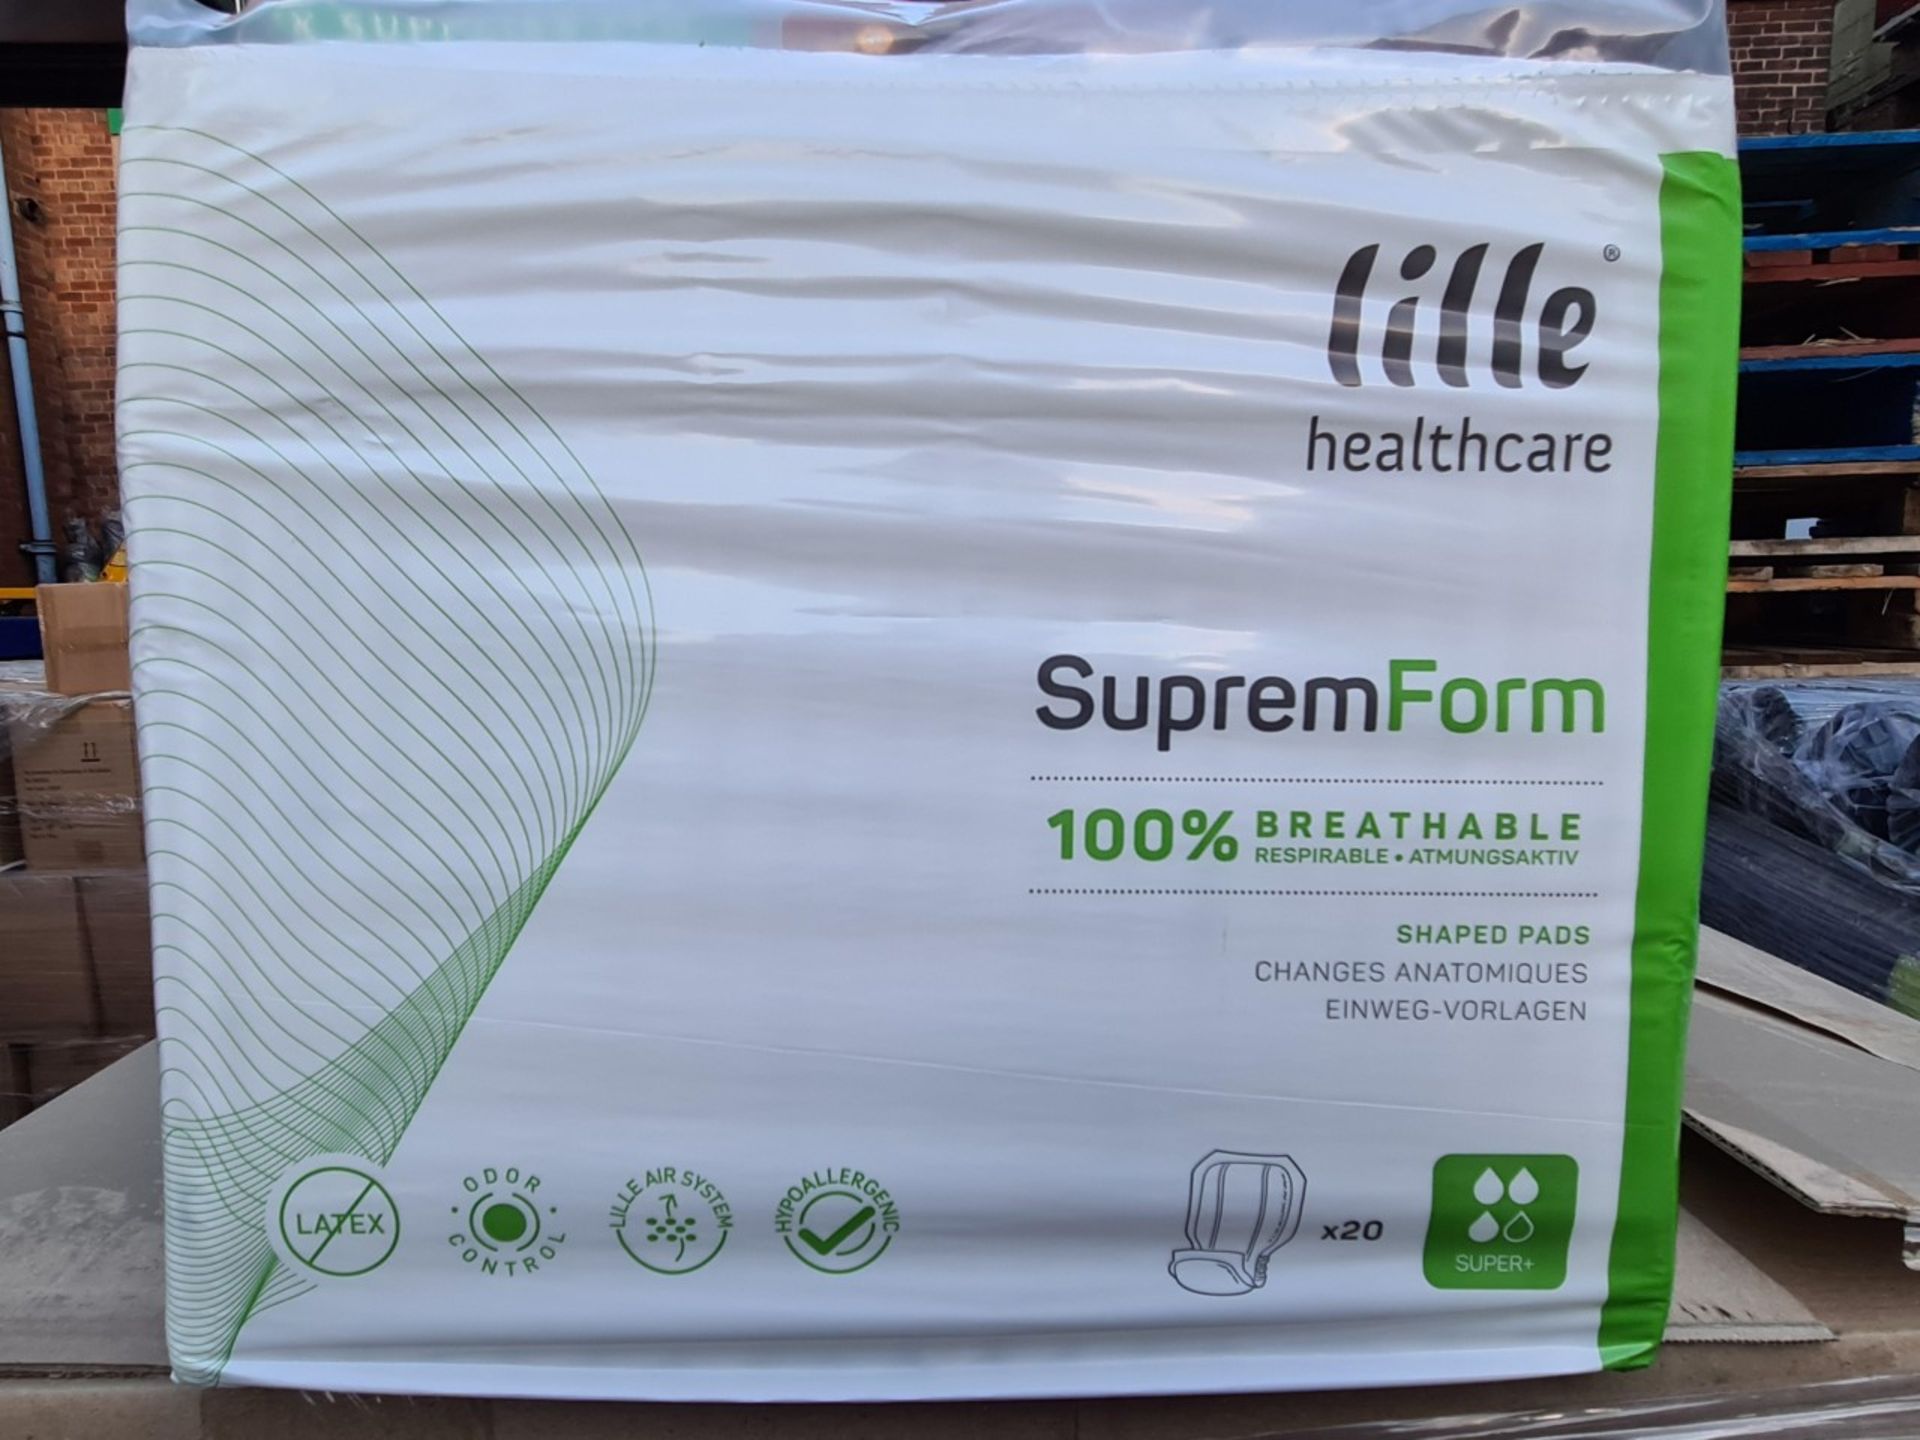 (J16) PALLET TO CONTAIN 48 x PACKS OF 20 LILLE HEALTCARE SUPREMEFORM 100% BREATHABLE SHAPED PADS.